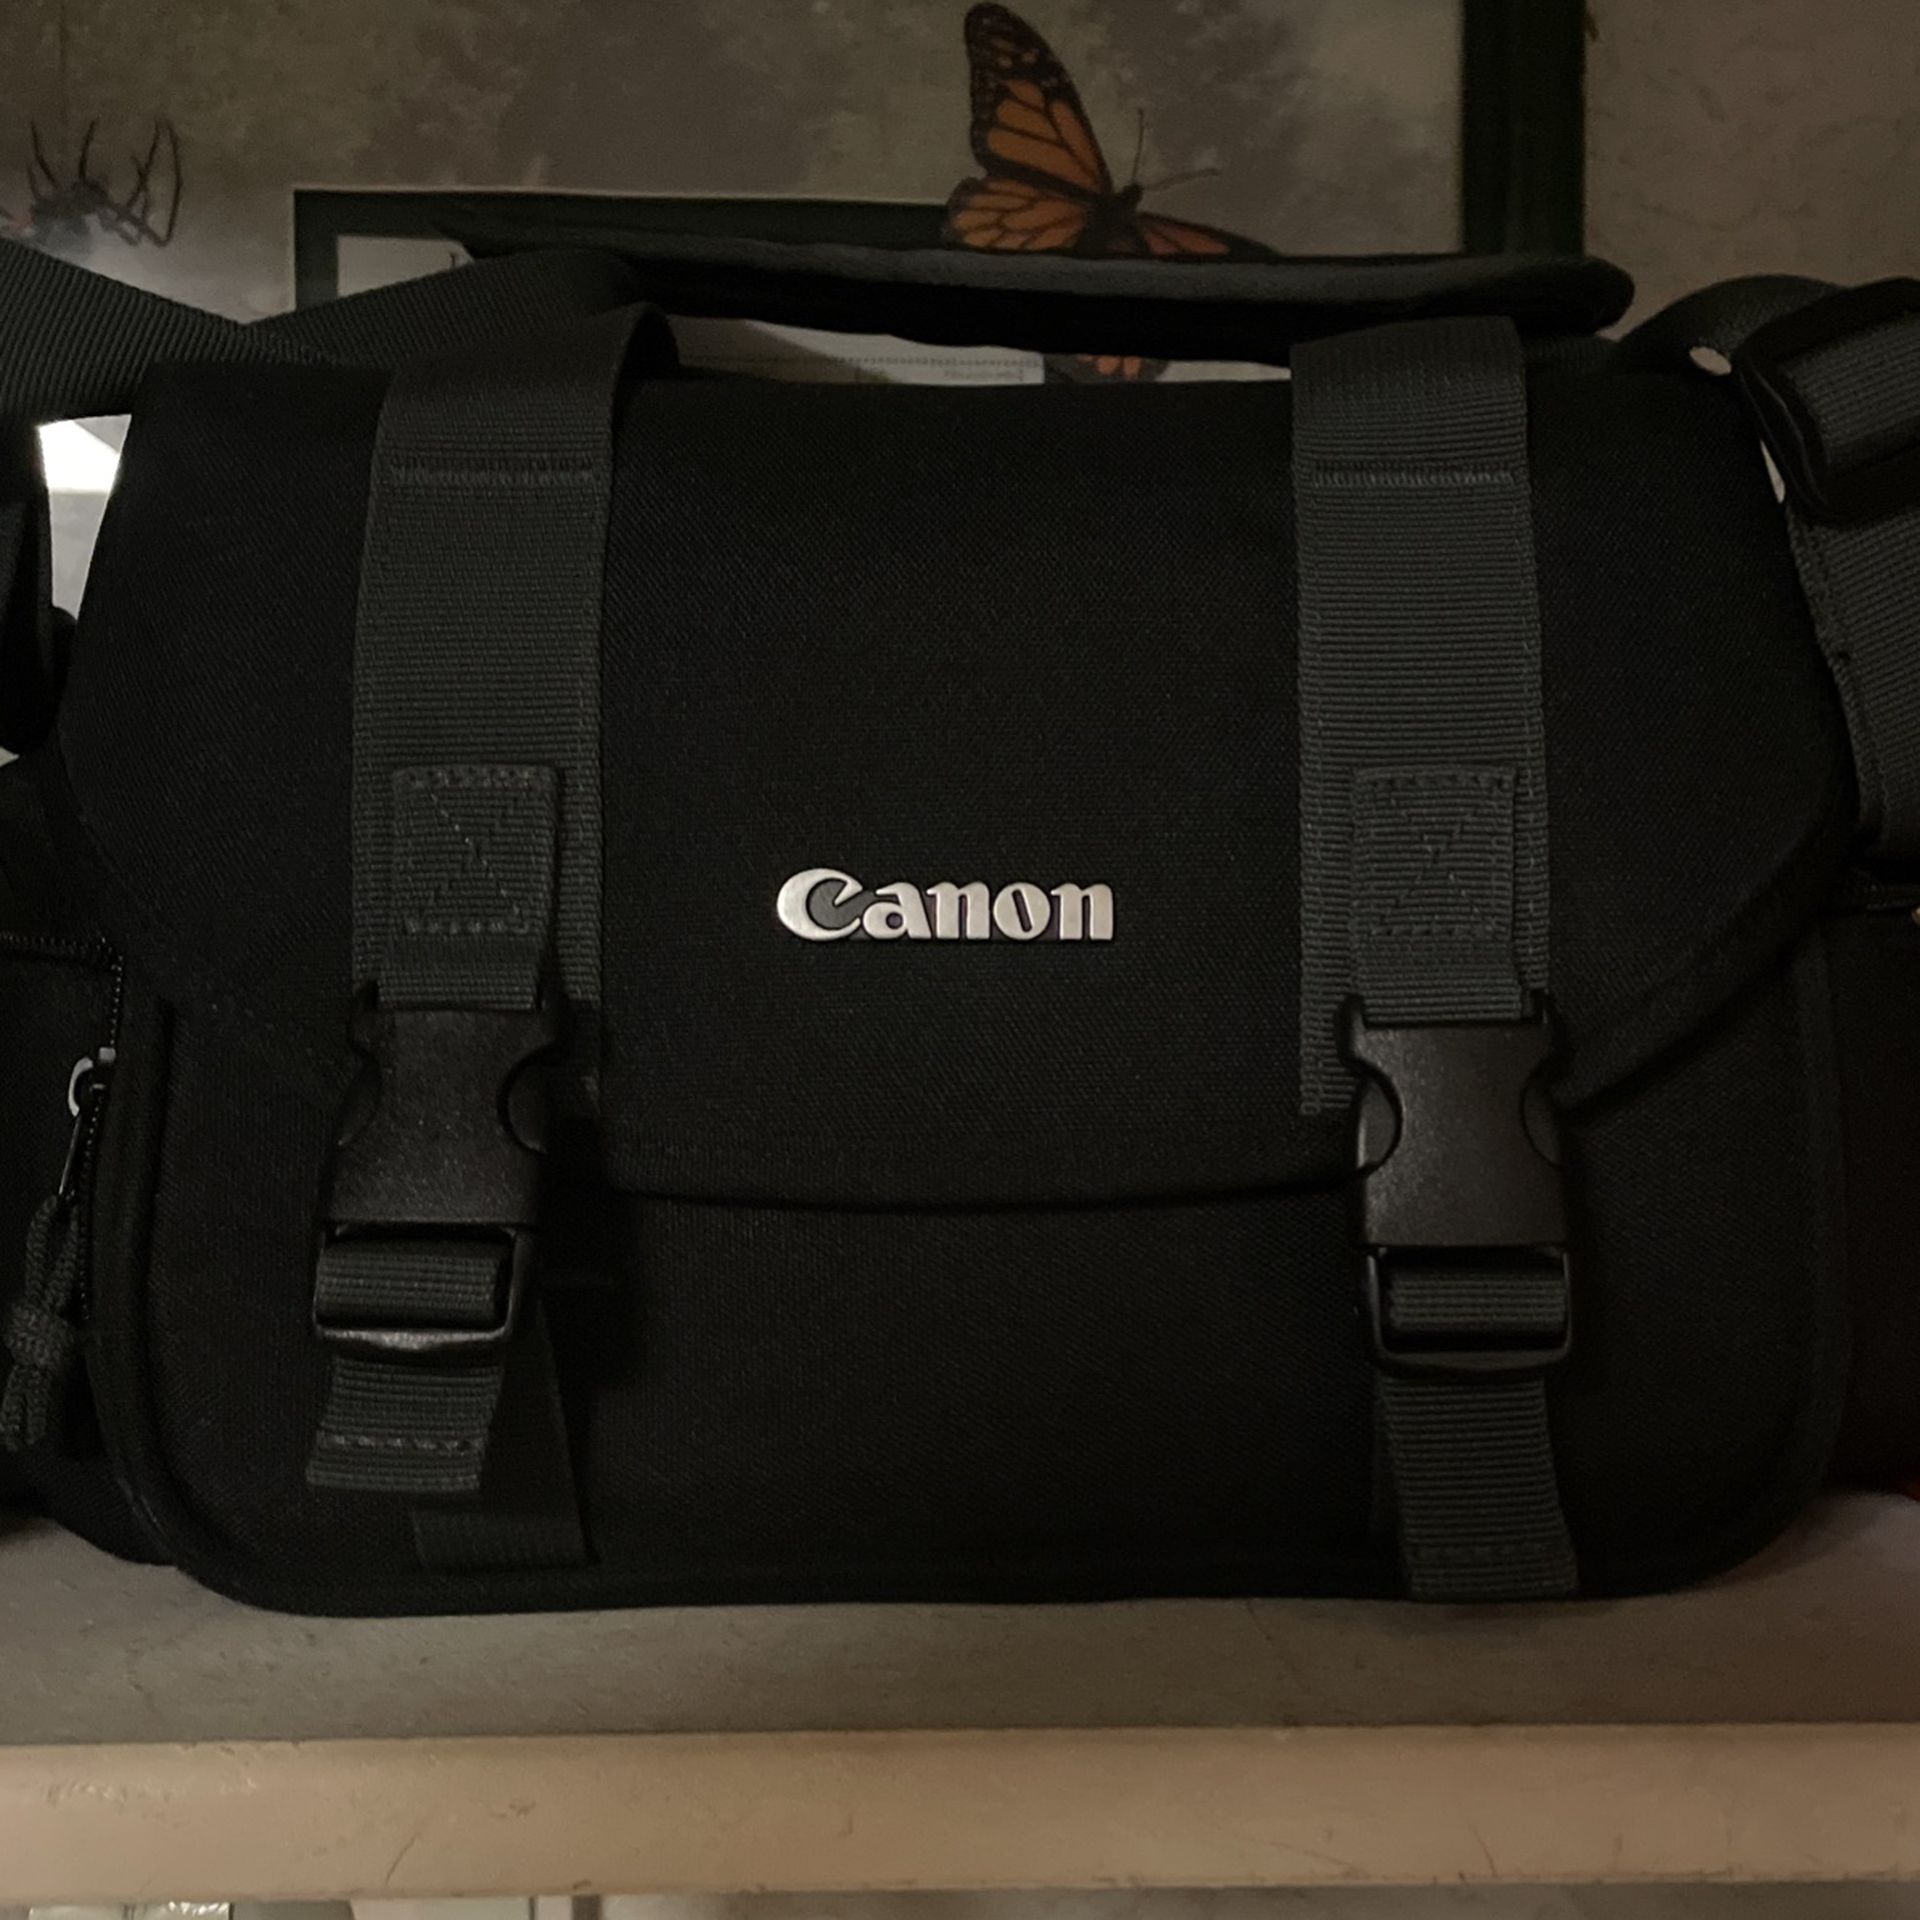 Canon Lens And Camera Bag